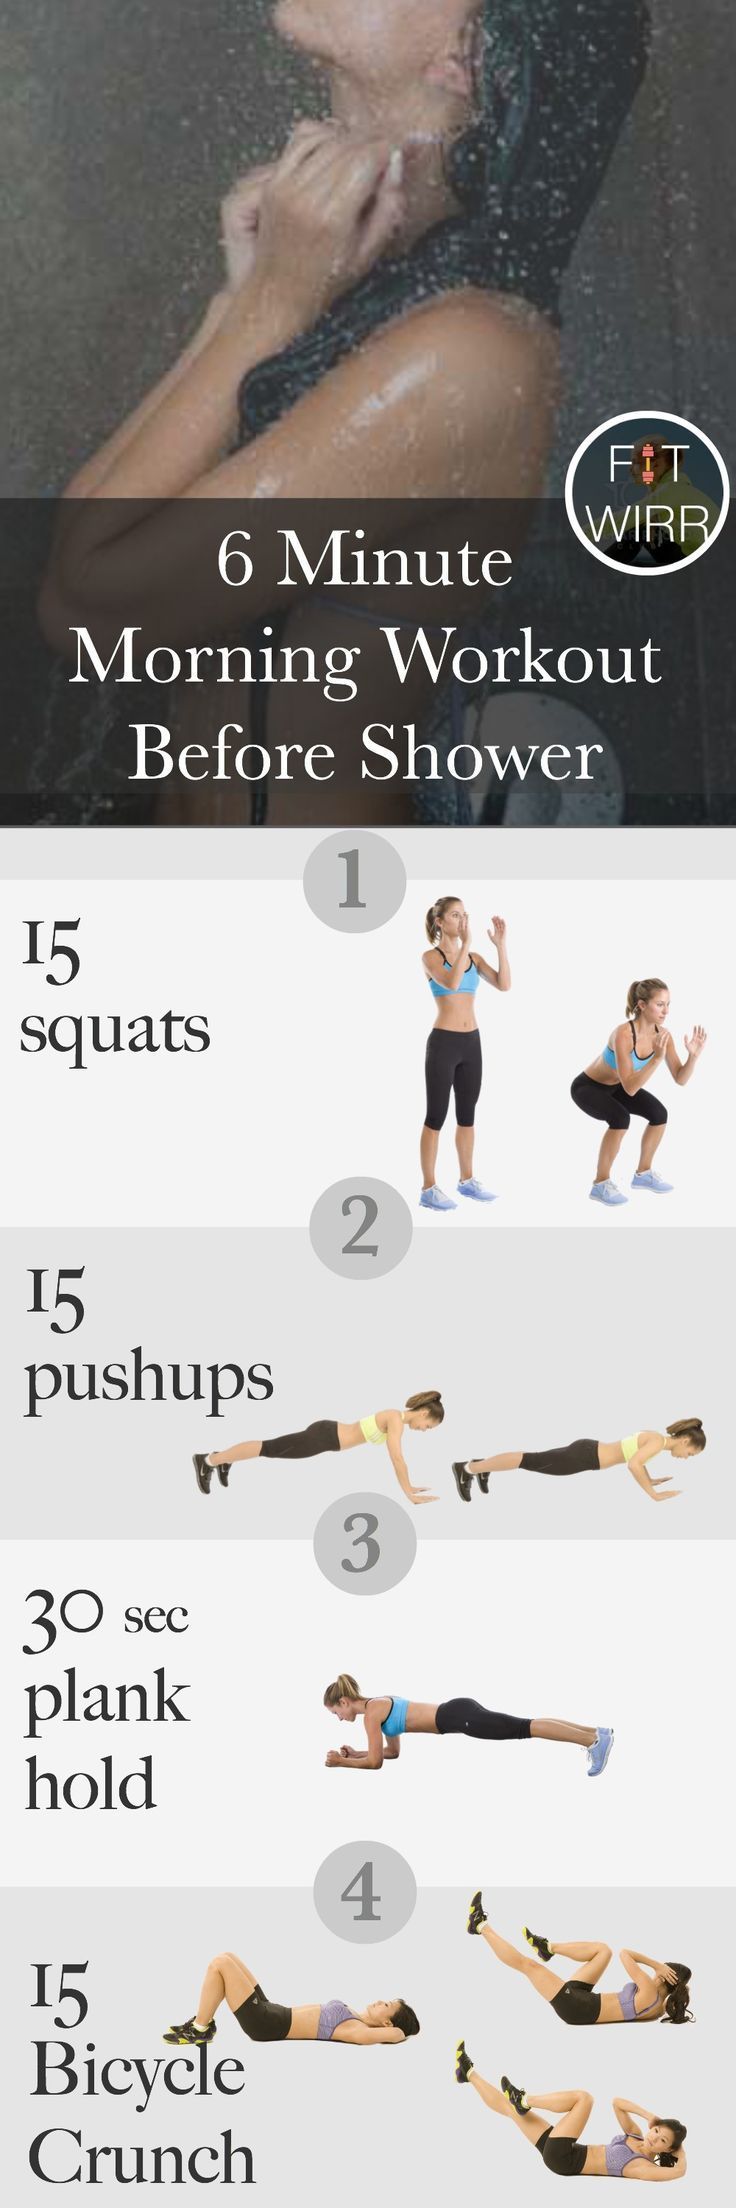 6 minute workout when your